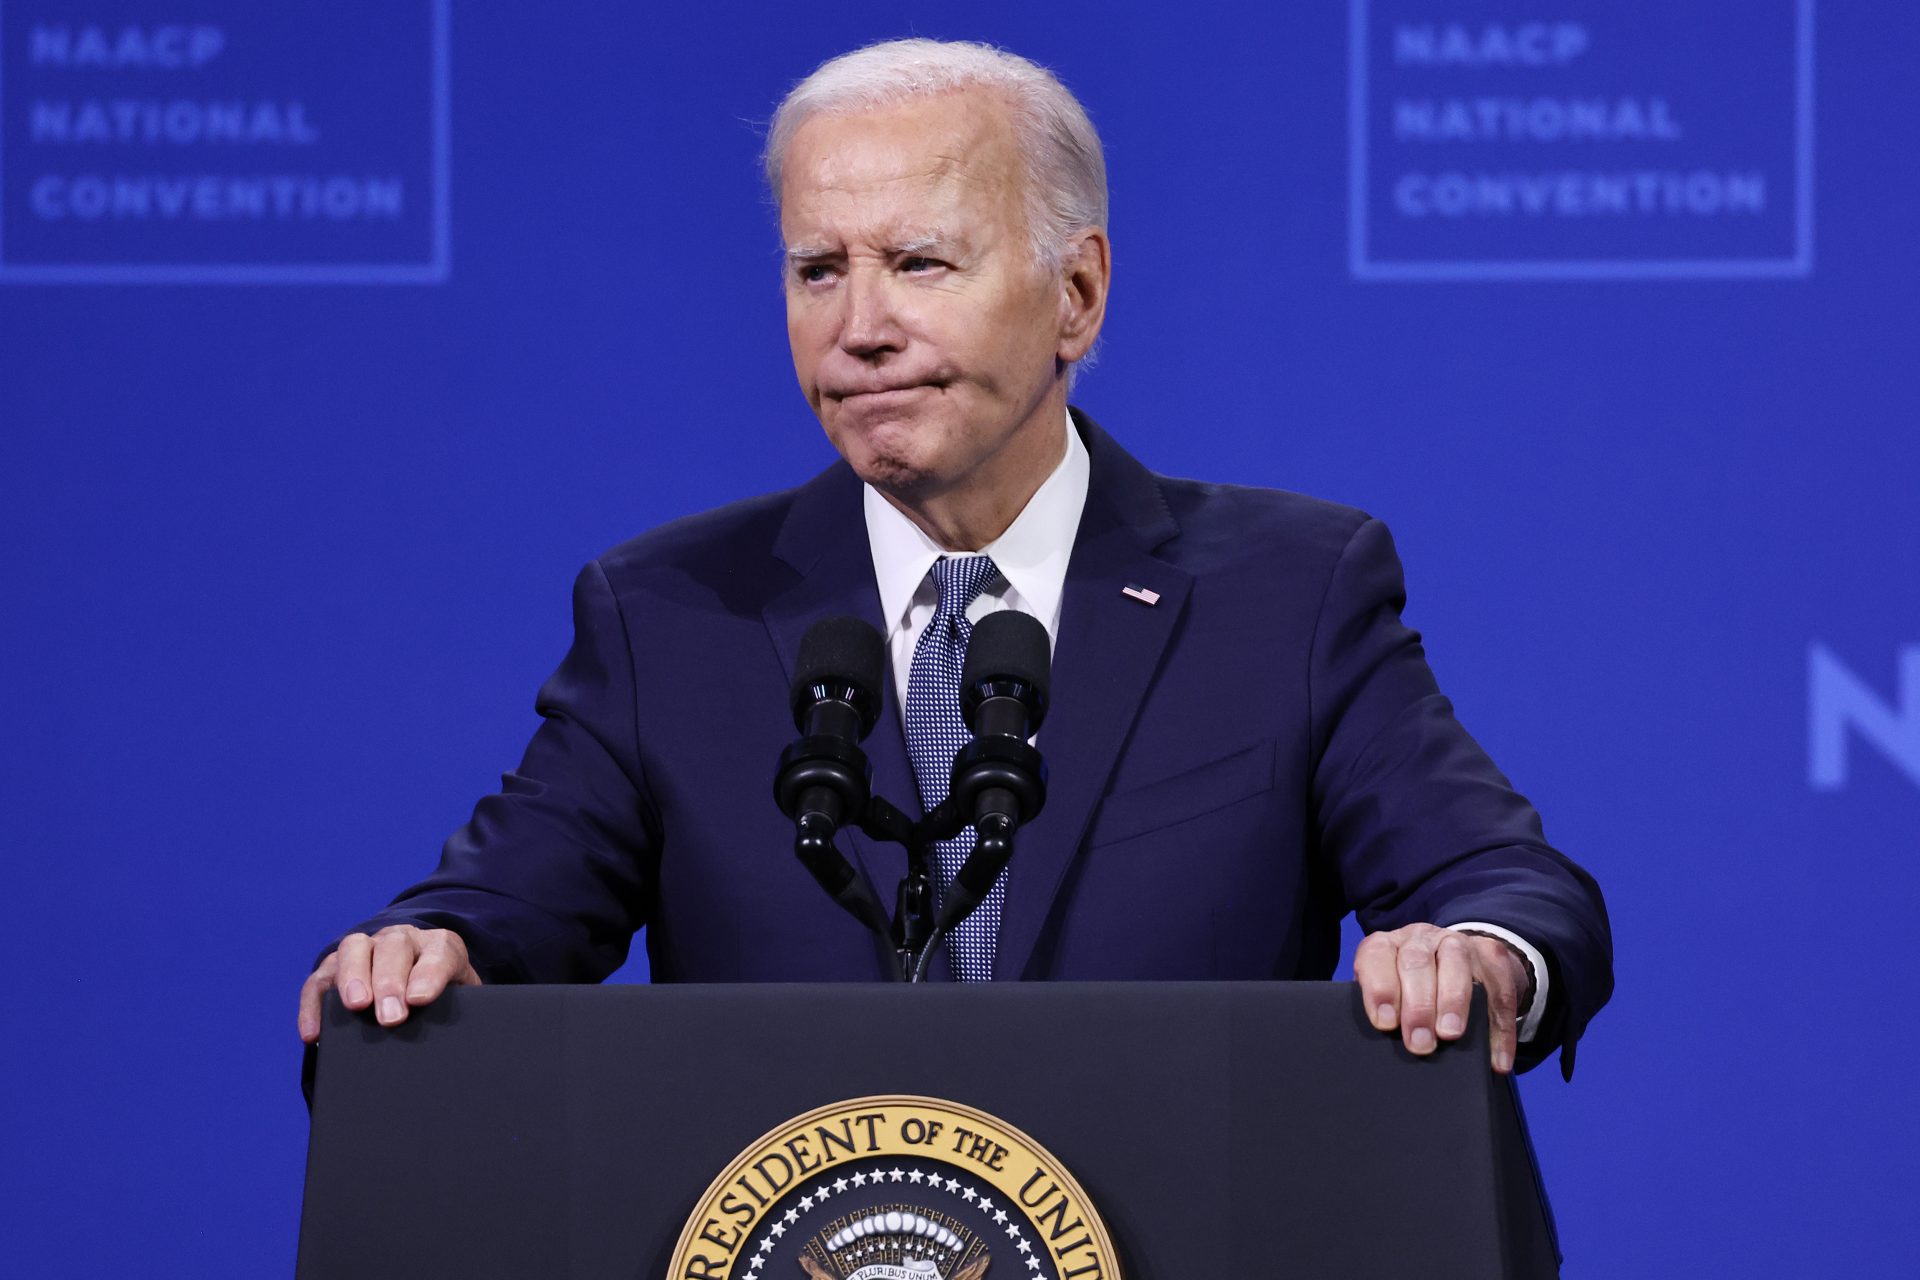 The conspiracy about Biden death